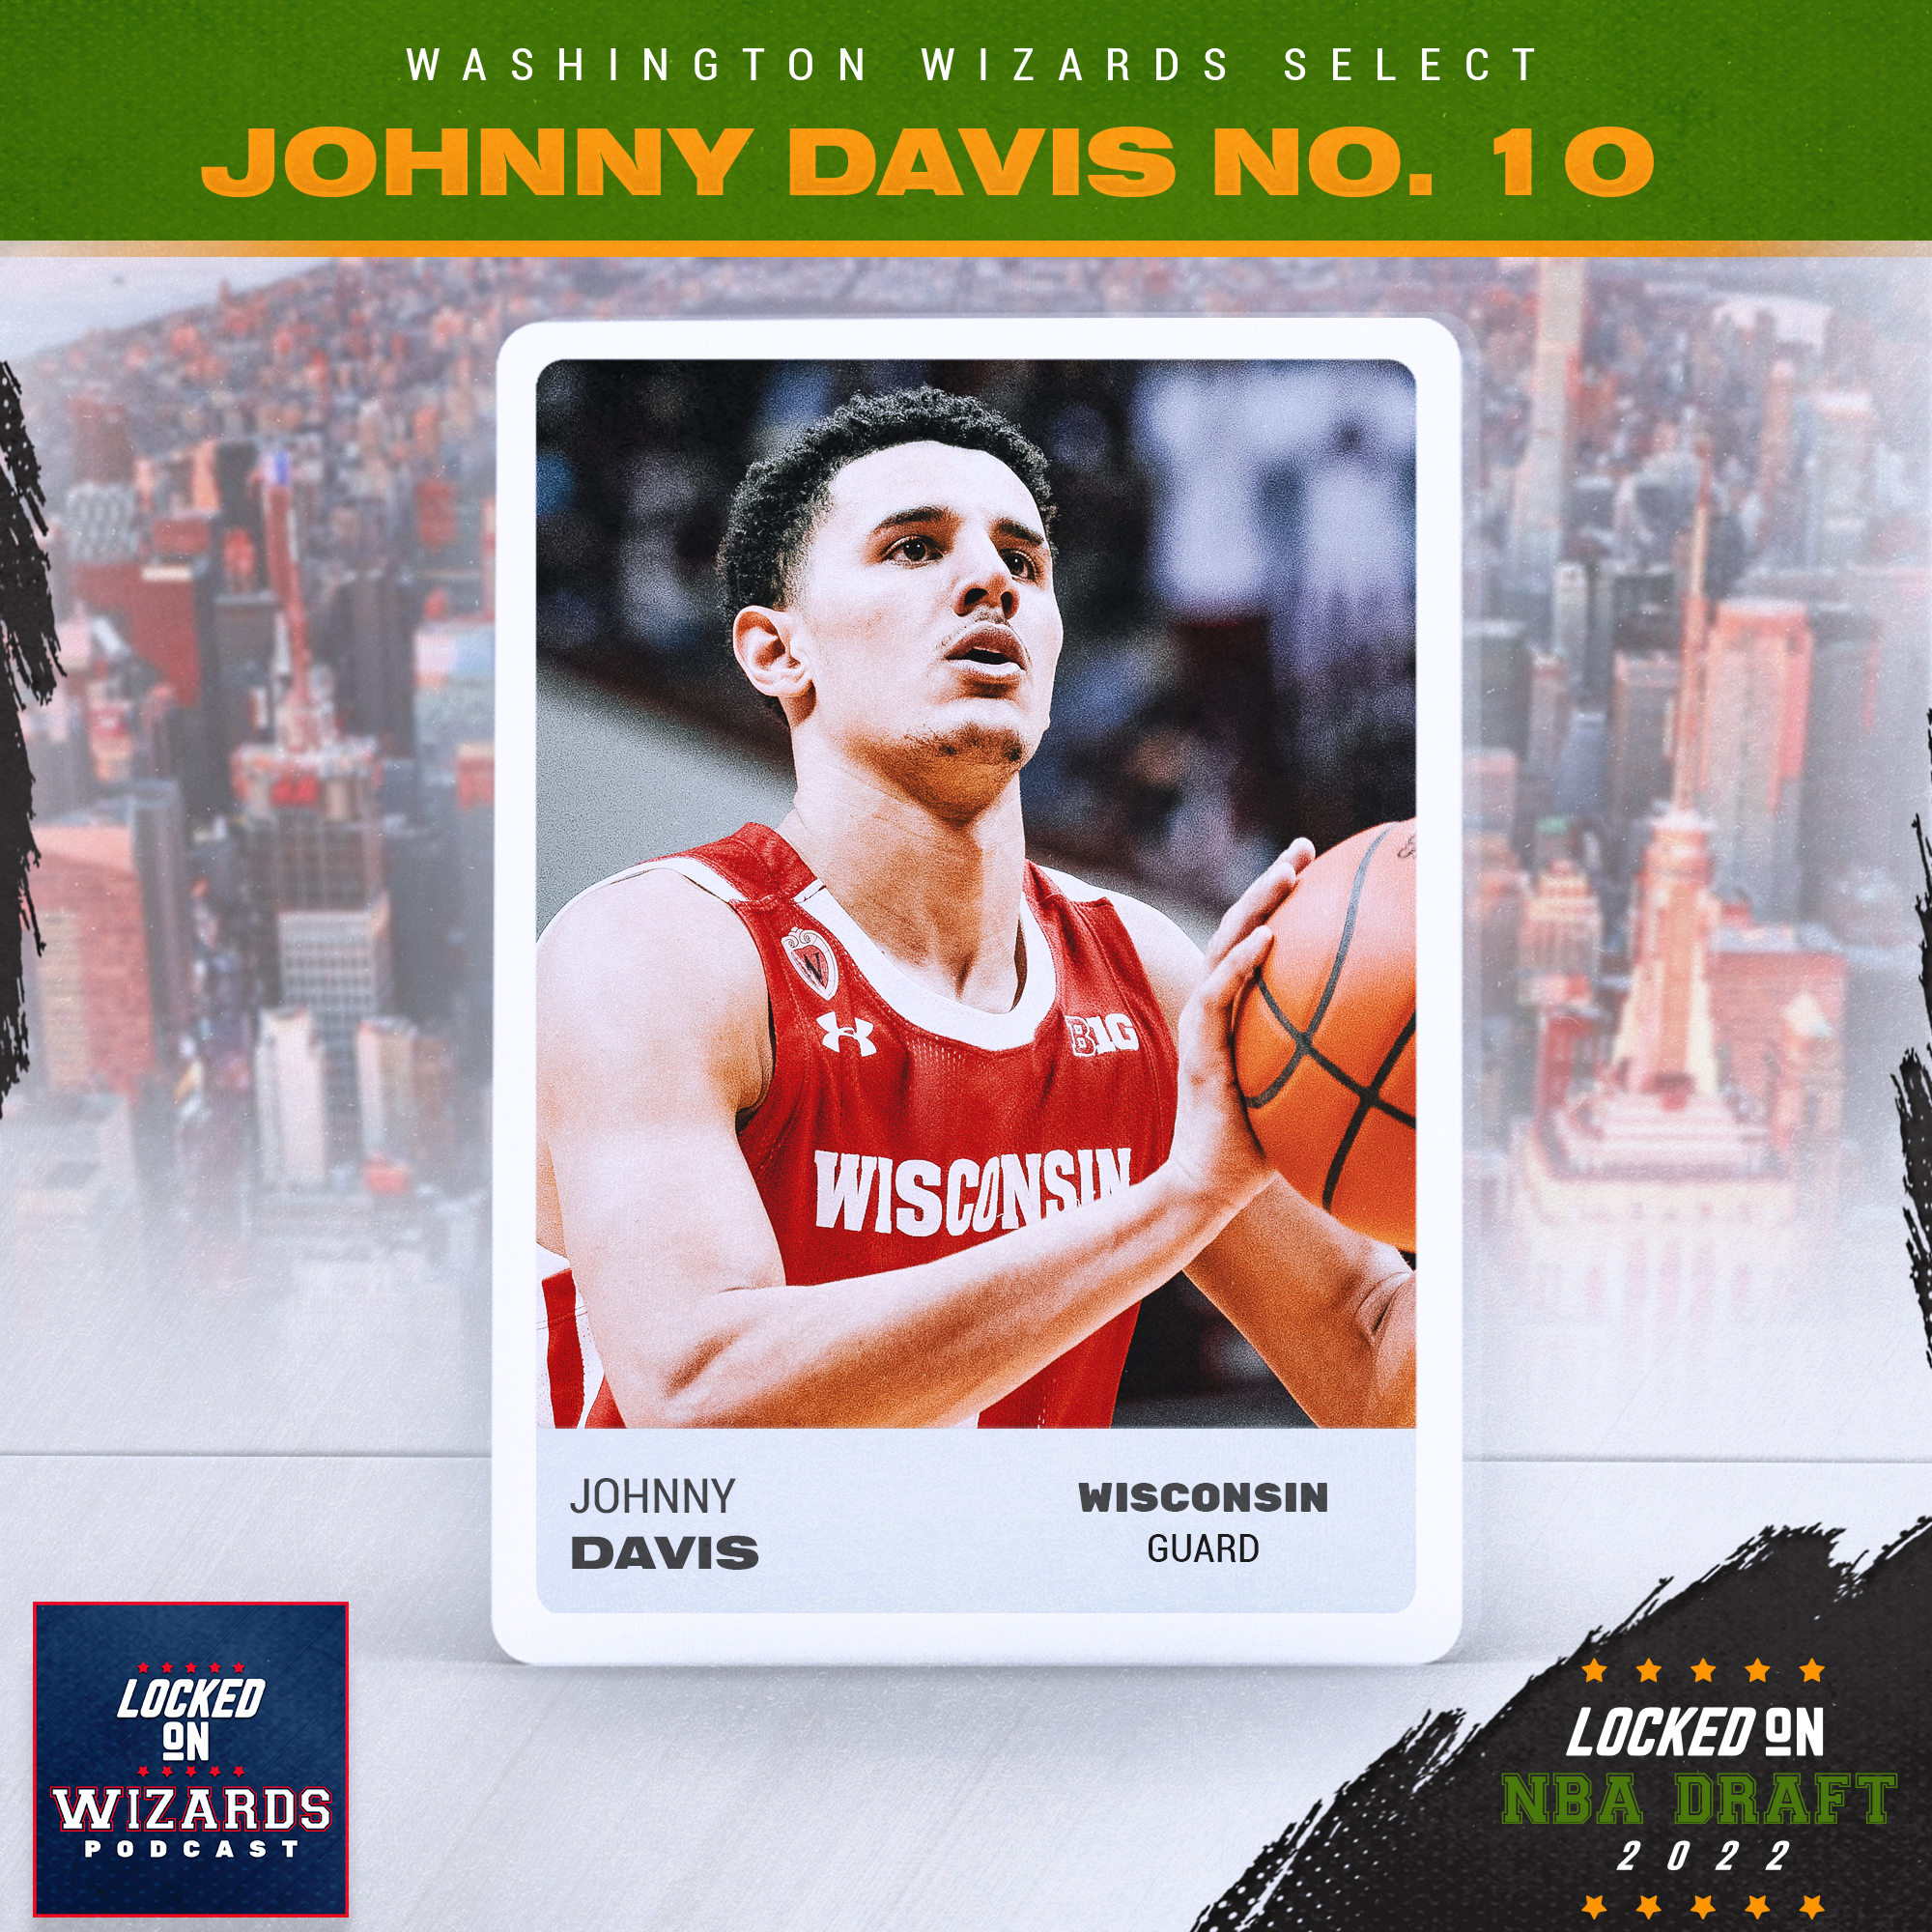 Twitter reacts to Johnny Davis being drafted No. 10 overall by the Wizards